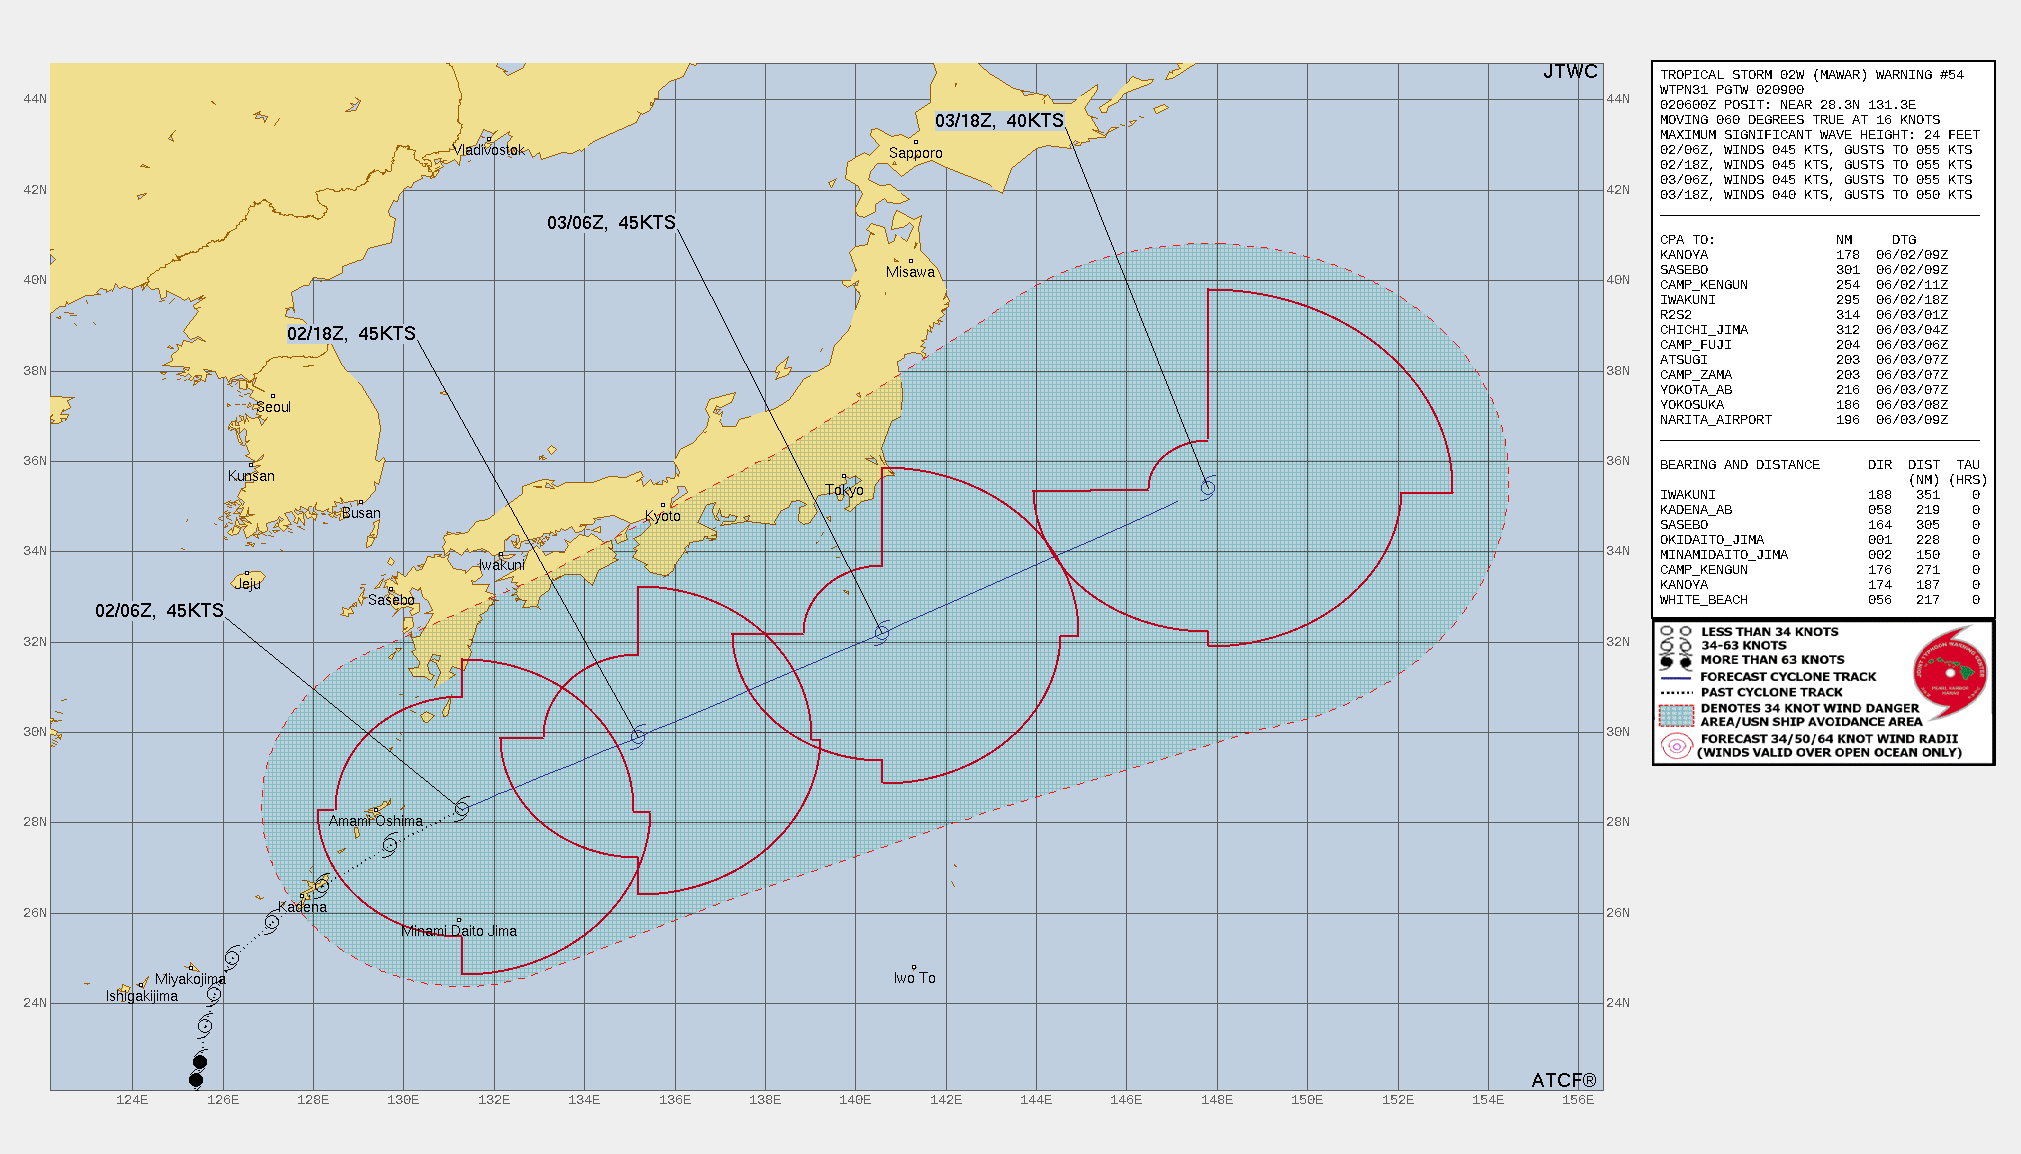 FORECAST REASONING.  SIGNIFICANT FORECAST CHANGES: THE CURRENT FORECAST TRACK IS SITUATED ABOUT 35 NM NORTH OF THE PREVIOUS FORECAST TRACK AT TAU 12 AND 30 NM NORTH AT TAU 24 DUE TO RECENT STORM MOTION, BUT CONVERGES WITH THE PREVIOUS FORECAST TRACK THEREAFTER. OTHERWISE, THERE ARE NO SIGNIFICANT CHANGES TO THE FORECAST FROM THE PREVIOUS WARNING.  FORECAST DISCUSSION: TS 02W WILL ACCELERATE EAST-NORTHEASTWARD AND COMPLETE EXTRATROPICAL TRANSITION DURING THE FORECAST PERIOD. UPPER-LEVEL FLOW ASSOCIATED WITH THE BAROCLINIC ZONE TO THE NORTH REMAINS FAIRLY ZONAL, AND THE SYSTEM IS EXPECTED TO STAY FULLY TROPICAL FOR AT LEAST THE NEXT 12 HOURS AS IT ACCELERATES EAST-NORTHEASTWARD IN THE STRONG STEERING FLOW ASSOCIATED WITH THE STR TO THE EAST AND SOUTH. HOWEVER, BY TAU 24, A LOW AMPLITUDE MIDLATITUDE TROUGH WILL BEGIN TO INTERACT WITH THE SYSTEM, AND 02W WILL TRANSITION TO A GALE FORCE EXTRATROPICAL LOW BY TAU 36. STRONG POLEWARD AND EASTWARD OUTFLOW ALOFT FOLLOWED BY FAVORABLE INTERACTION WITH THE AFOREMENTIONED MIDLATITUDE TROUGH DURING EXTRATROPICAL TRANSITION WILL ALLOW THE SYSTEM TO MAINTAIN INTENSITY THROUGHOUT THE FORECAST PERIOD DESPITE DECREASING ALONG-TRACK SEA SURFACE TEMPERATURES AND INCREASING VERTICAL WIND  SHEAR. THE DEEPEST CONVECTION AND STRONGEST LOW-LEVEL WINDS  ASSOCIATED WITH THE SYSTEM ARE EXPECTED TO REMAIN WITHIN THE EASTERN  AND SOUTHERN QUADRANTS.